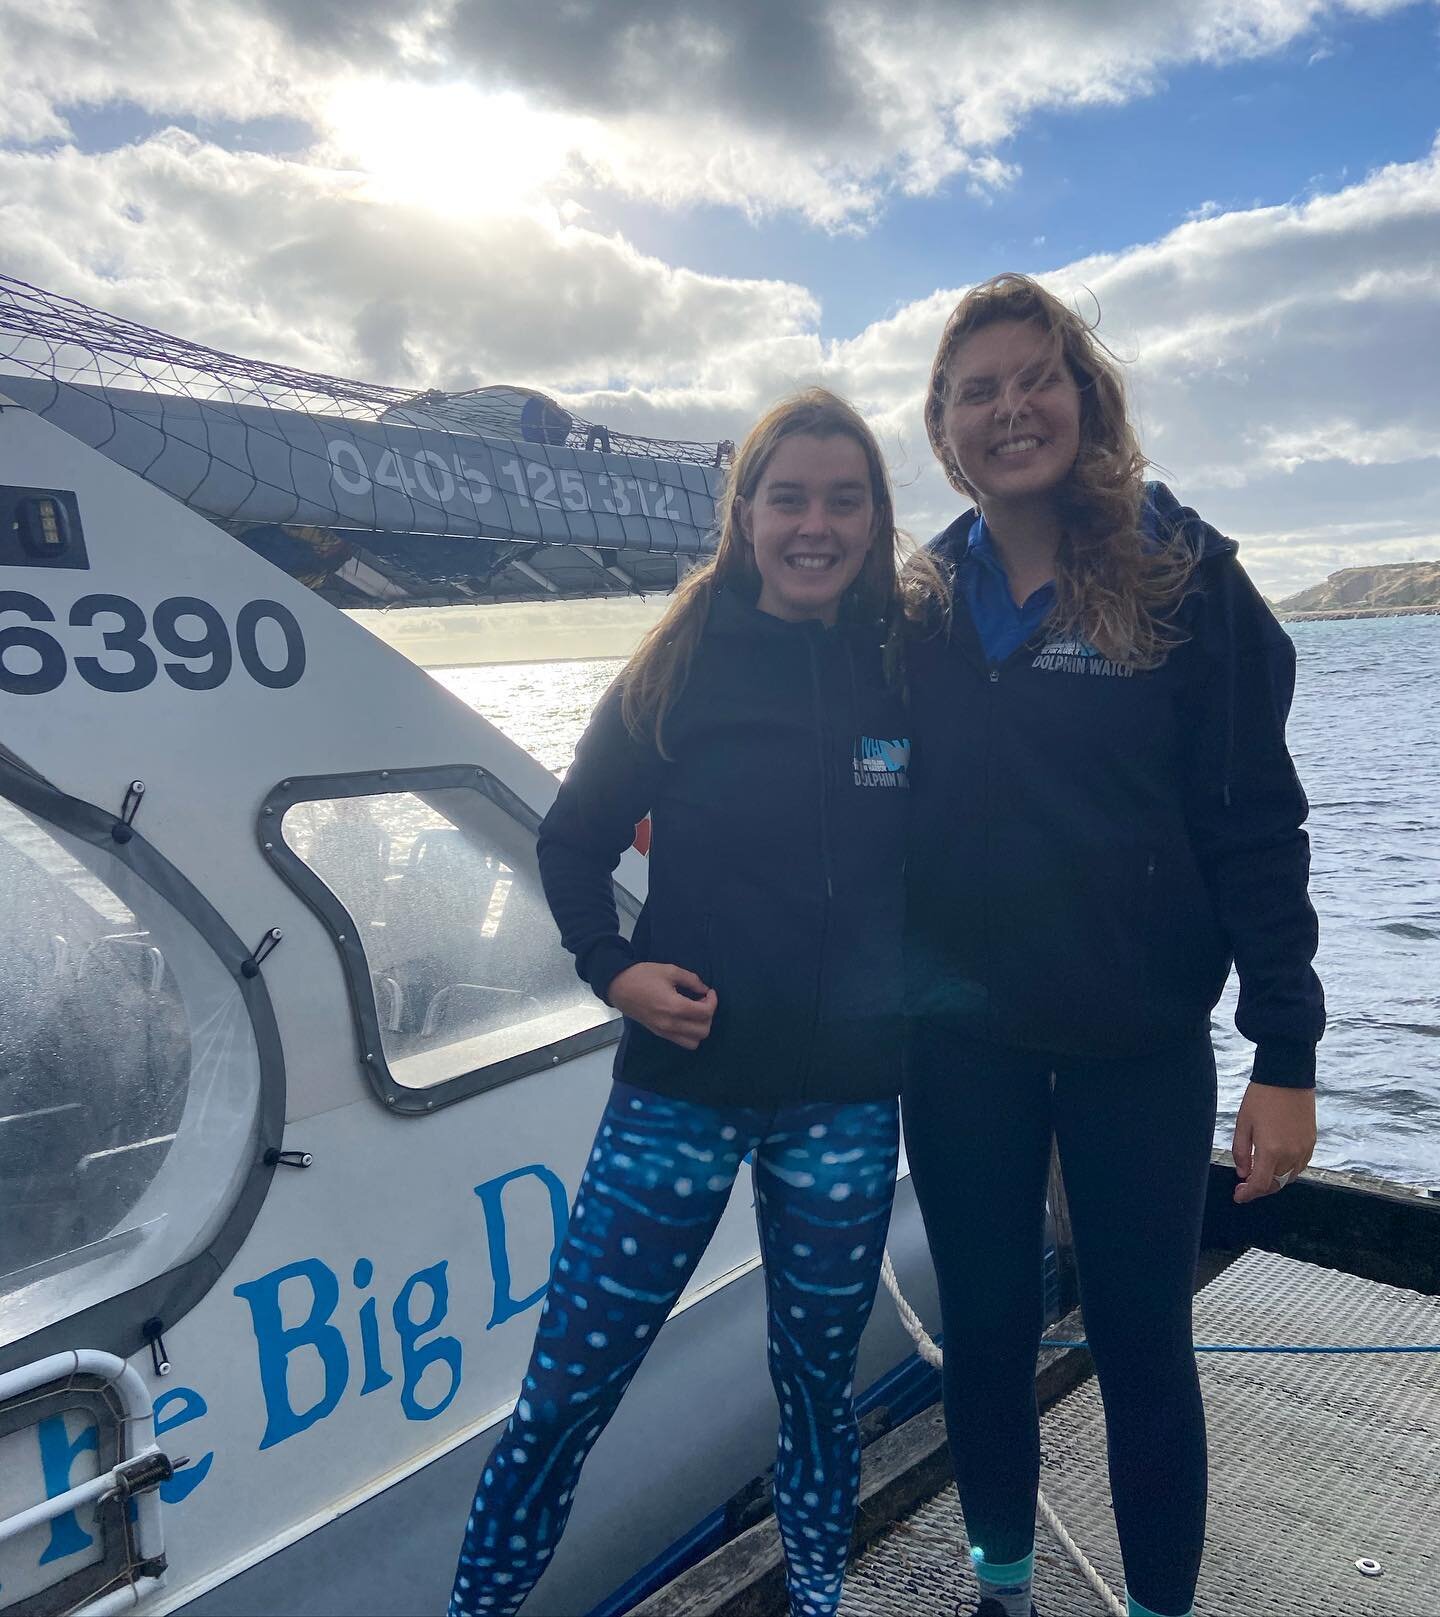 Crew Maddie and Sophie getting ready to head out on the monthly @kivhdolphinwatch survey. These surveys have been happening for nearly 10 years, monitoring the local pods of Bottlenose and Common Dolphins. Thank you for all your wonderful work @kivhd